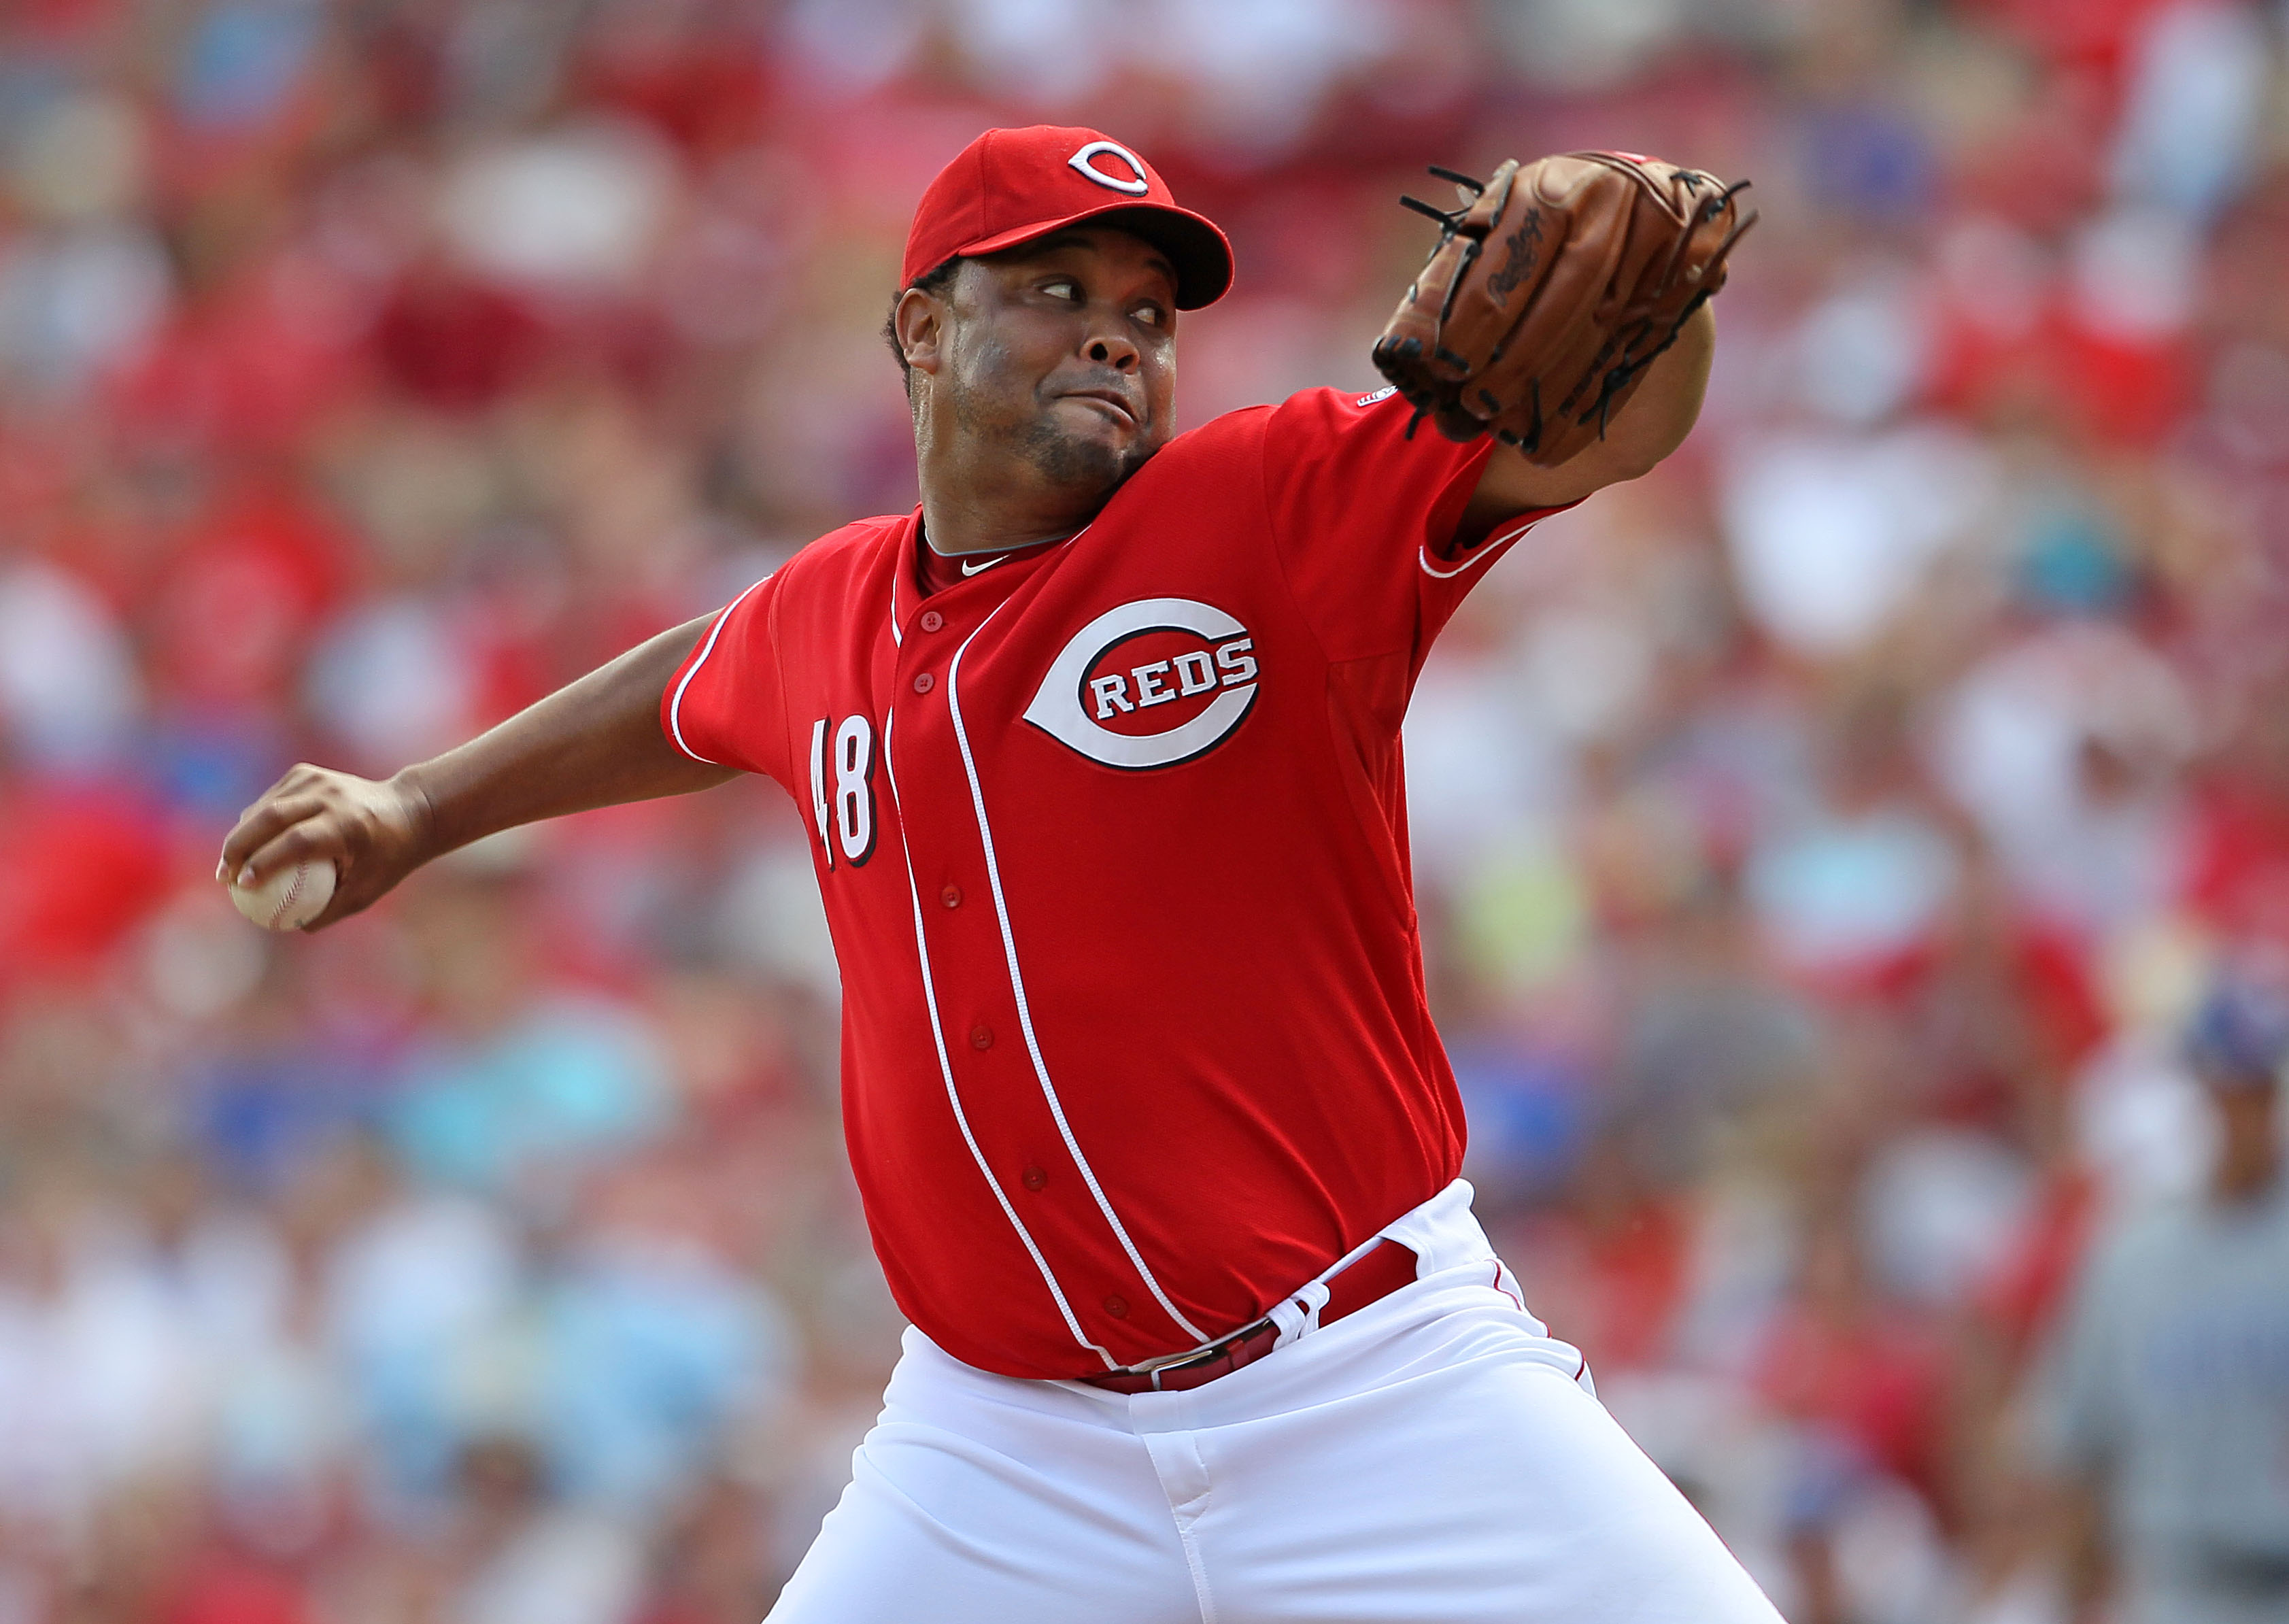 CINCINNATI - AUGUST 29:  Francisco Cordero #48  of the Cincinnati Reds throws a pitch during the 7-5 win over the Chicago Cubs at Great American Ball Park on August 29, 2010 in Cincinnati, Ohio.  (Photo by Andy Lyons/Getty Images)